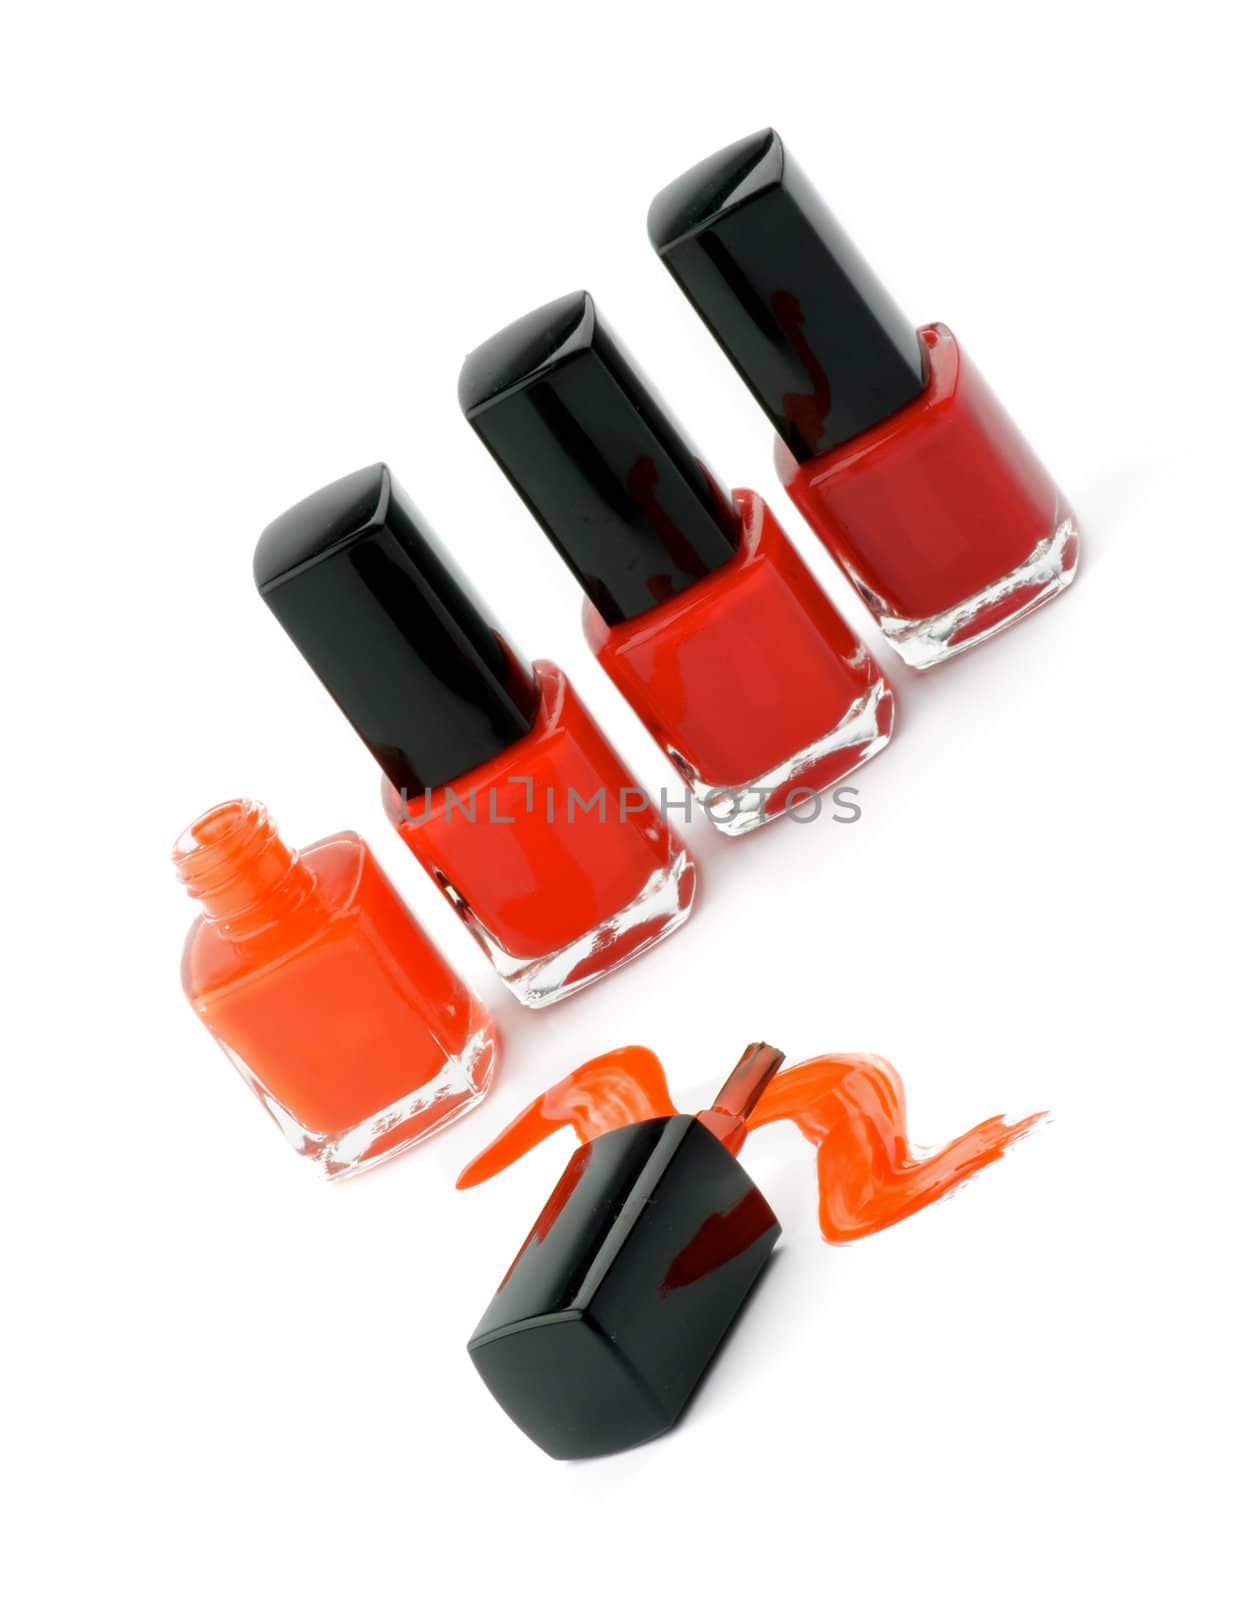 Four Bright Nail Varnishs and Spilled with Brush isolated on white background